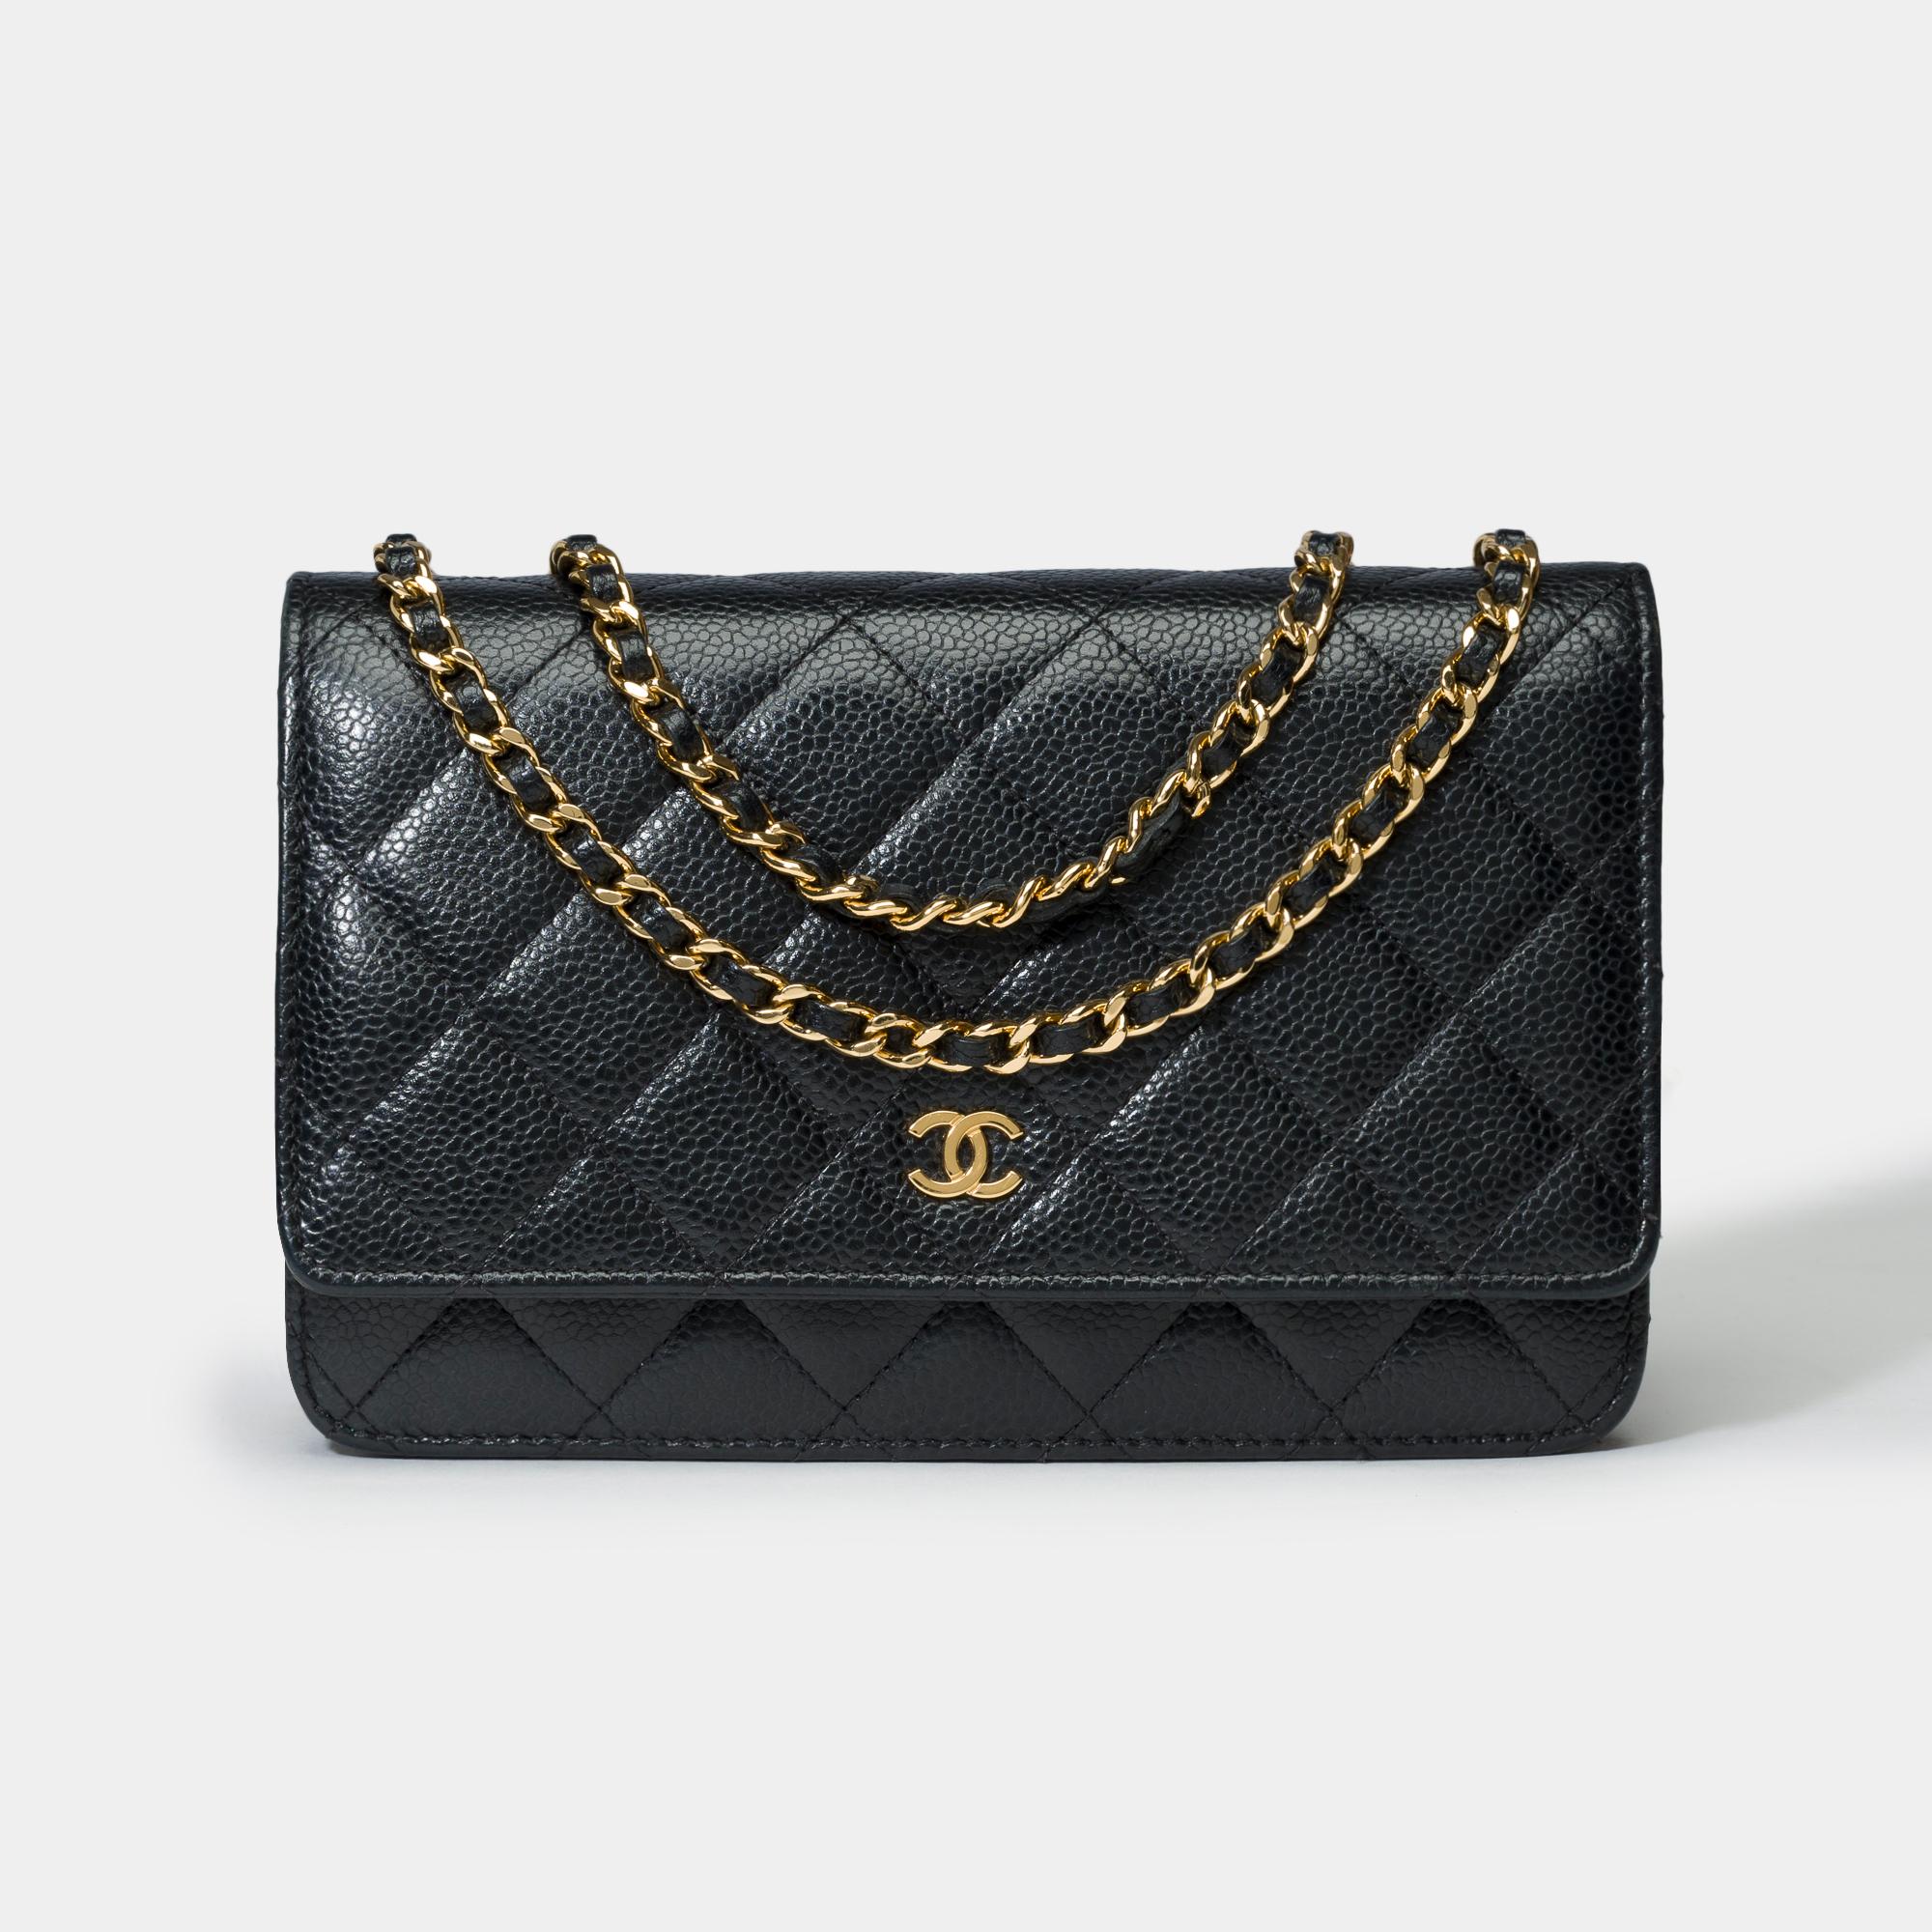 Lovely​​ ​​Chanel​​ ​​Wallet​​ ​​On​​ ​​Chain(WOC)​​ ​​shoulder​​ ​​bag​​ ​​​​ ​​in​​ ​​black​​ ​​quilted​​ ​​caviar​​ ​​leather,​​ ​​gold​​ ​​metal​​ ​​trim,​​ ​​a​​ ​​gold​​ ​​metal​​ ​​chain​​ ​​handle​​ ​​interlaced​​ ​​with​​ ​​black​​